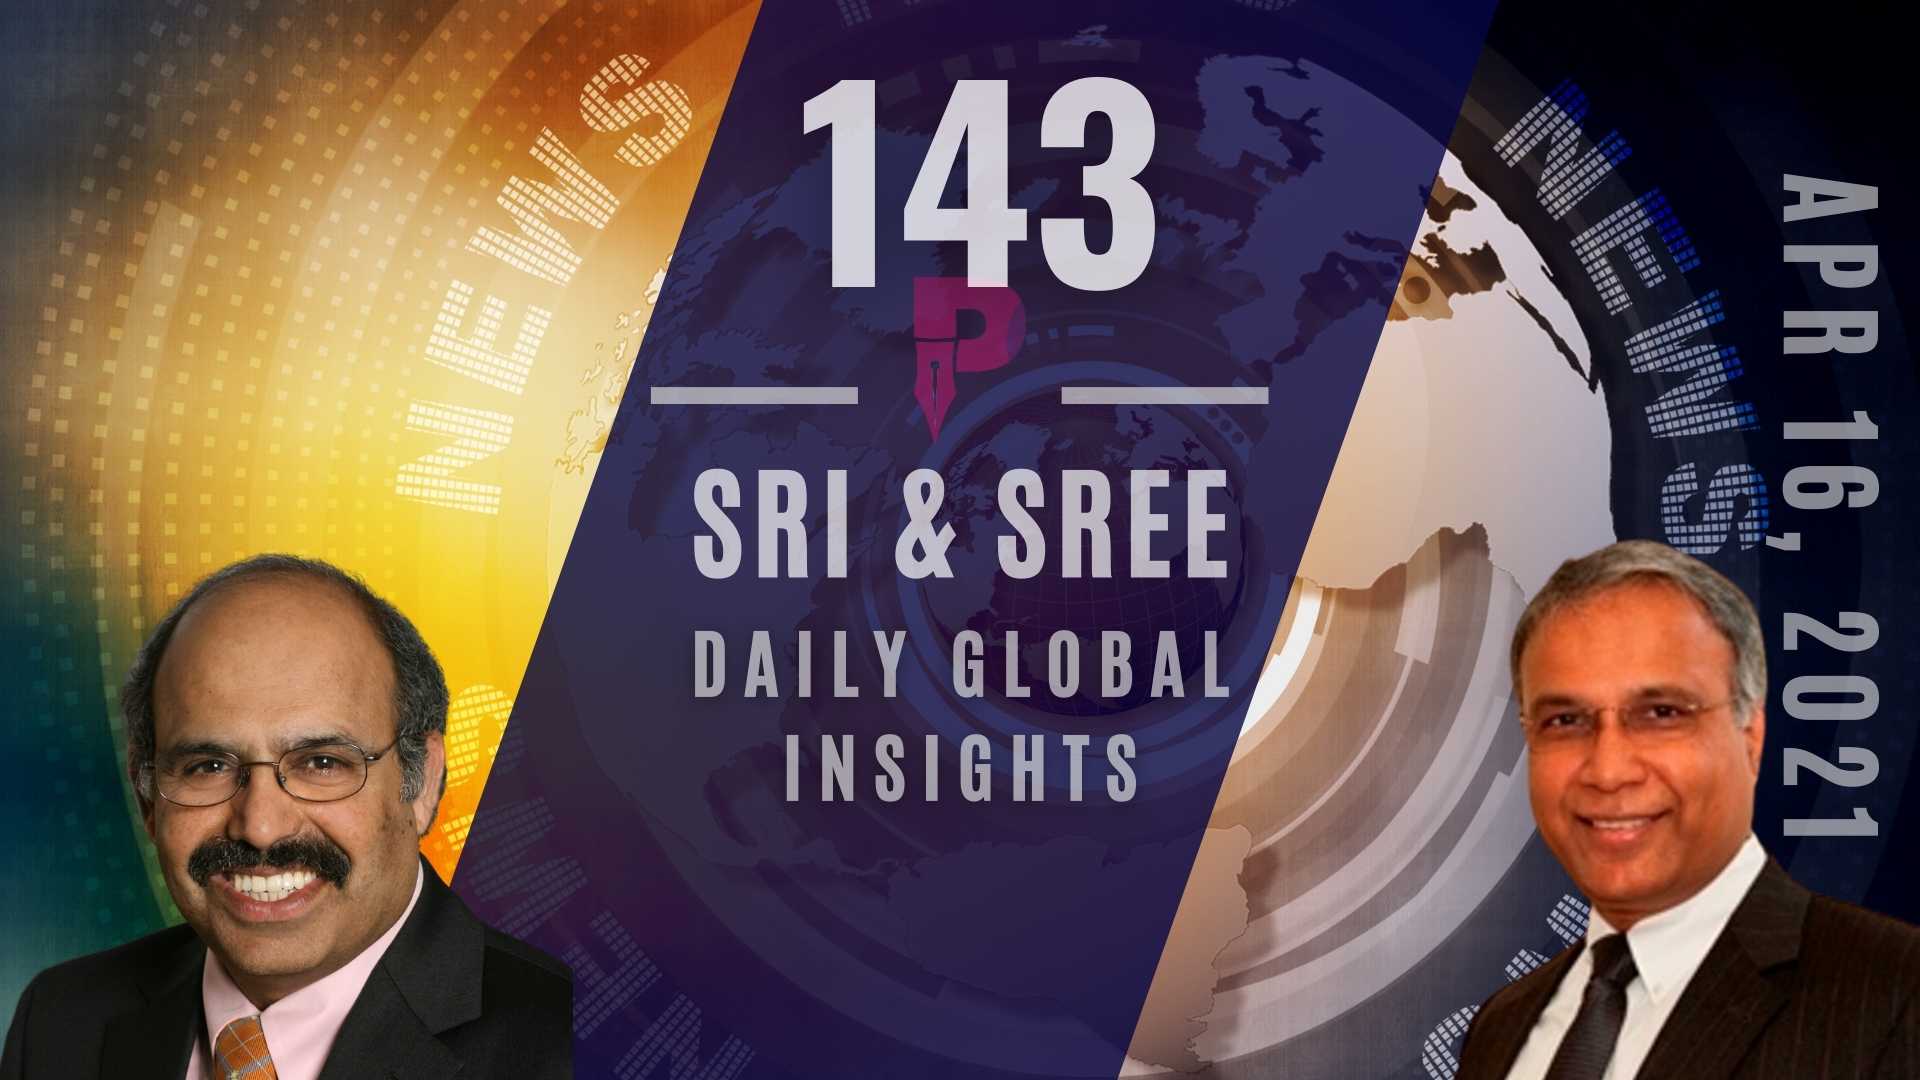 #EP143: Under Modi, India will hit back if provoked: US Intel report, Chinese virus origin, Retail Sales jumped 9.8% in March as additional Stimulus sent consumer spending soaring, & more!